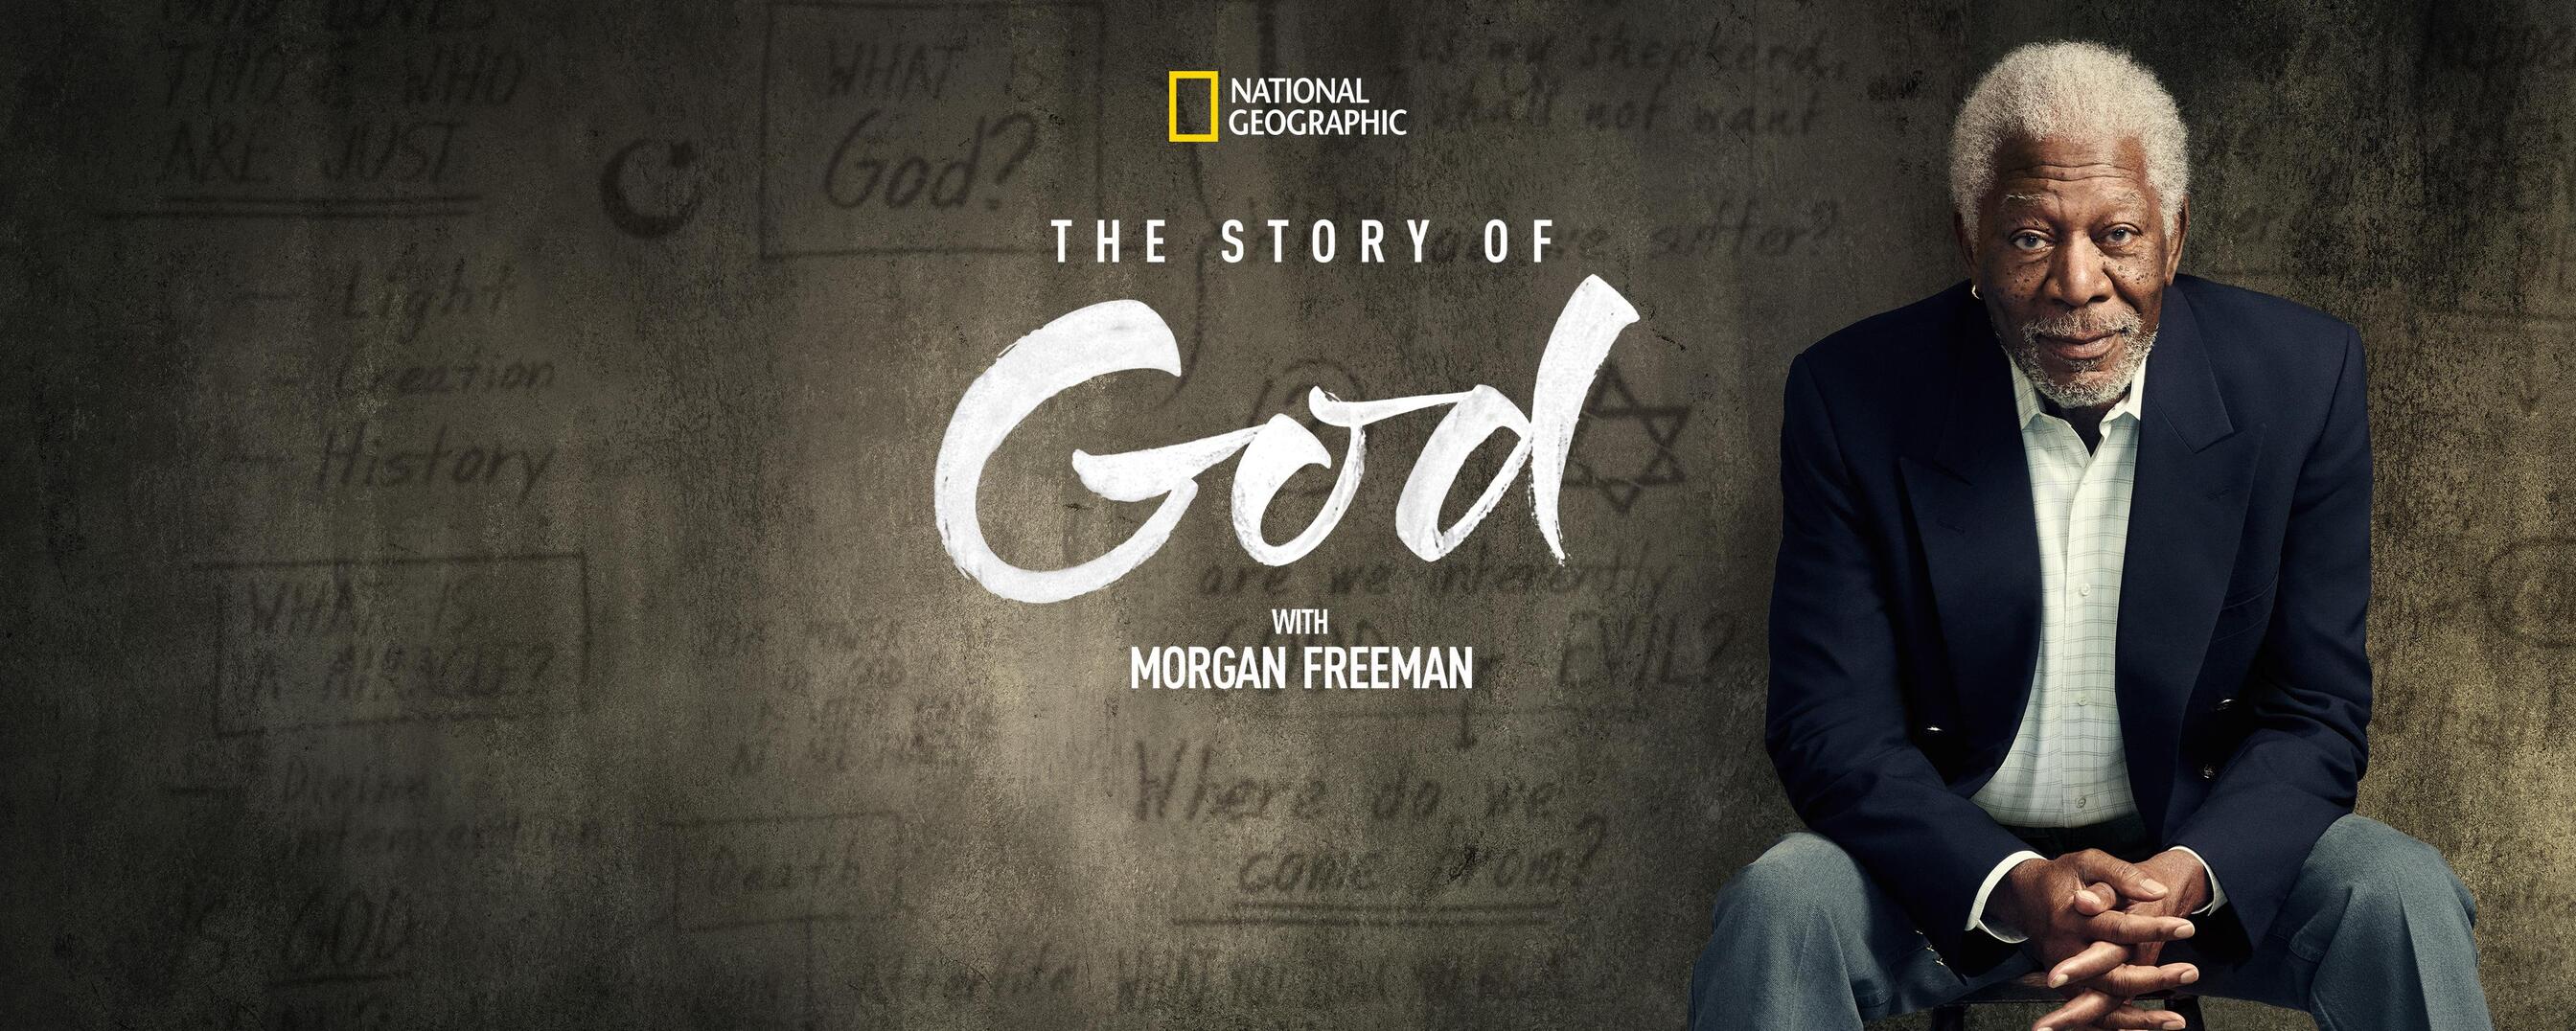 Watch The Story Of God With Morgan Freeman Tv Show Streaming Online Nat Geo Tv